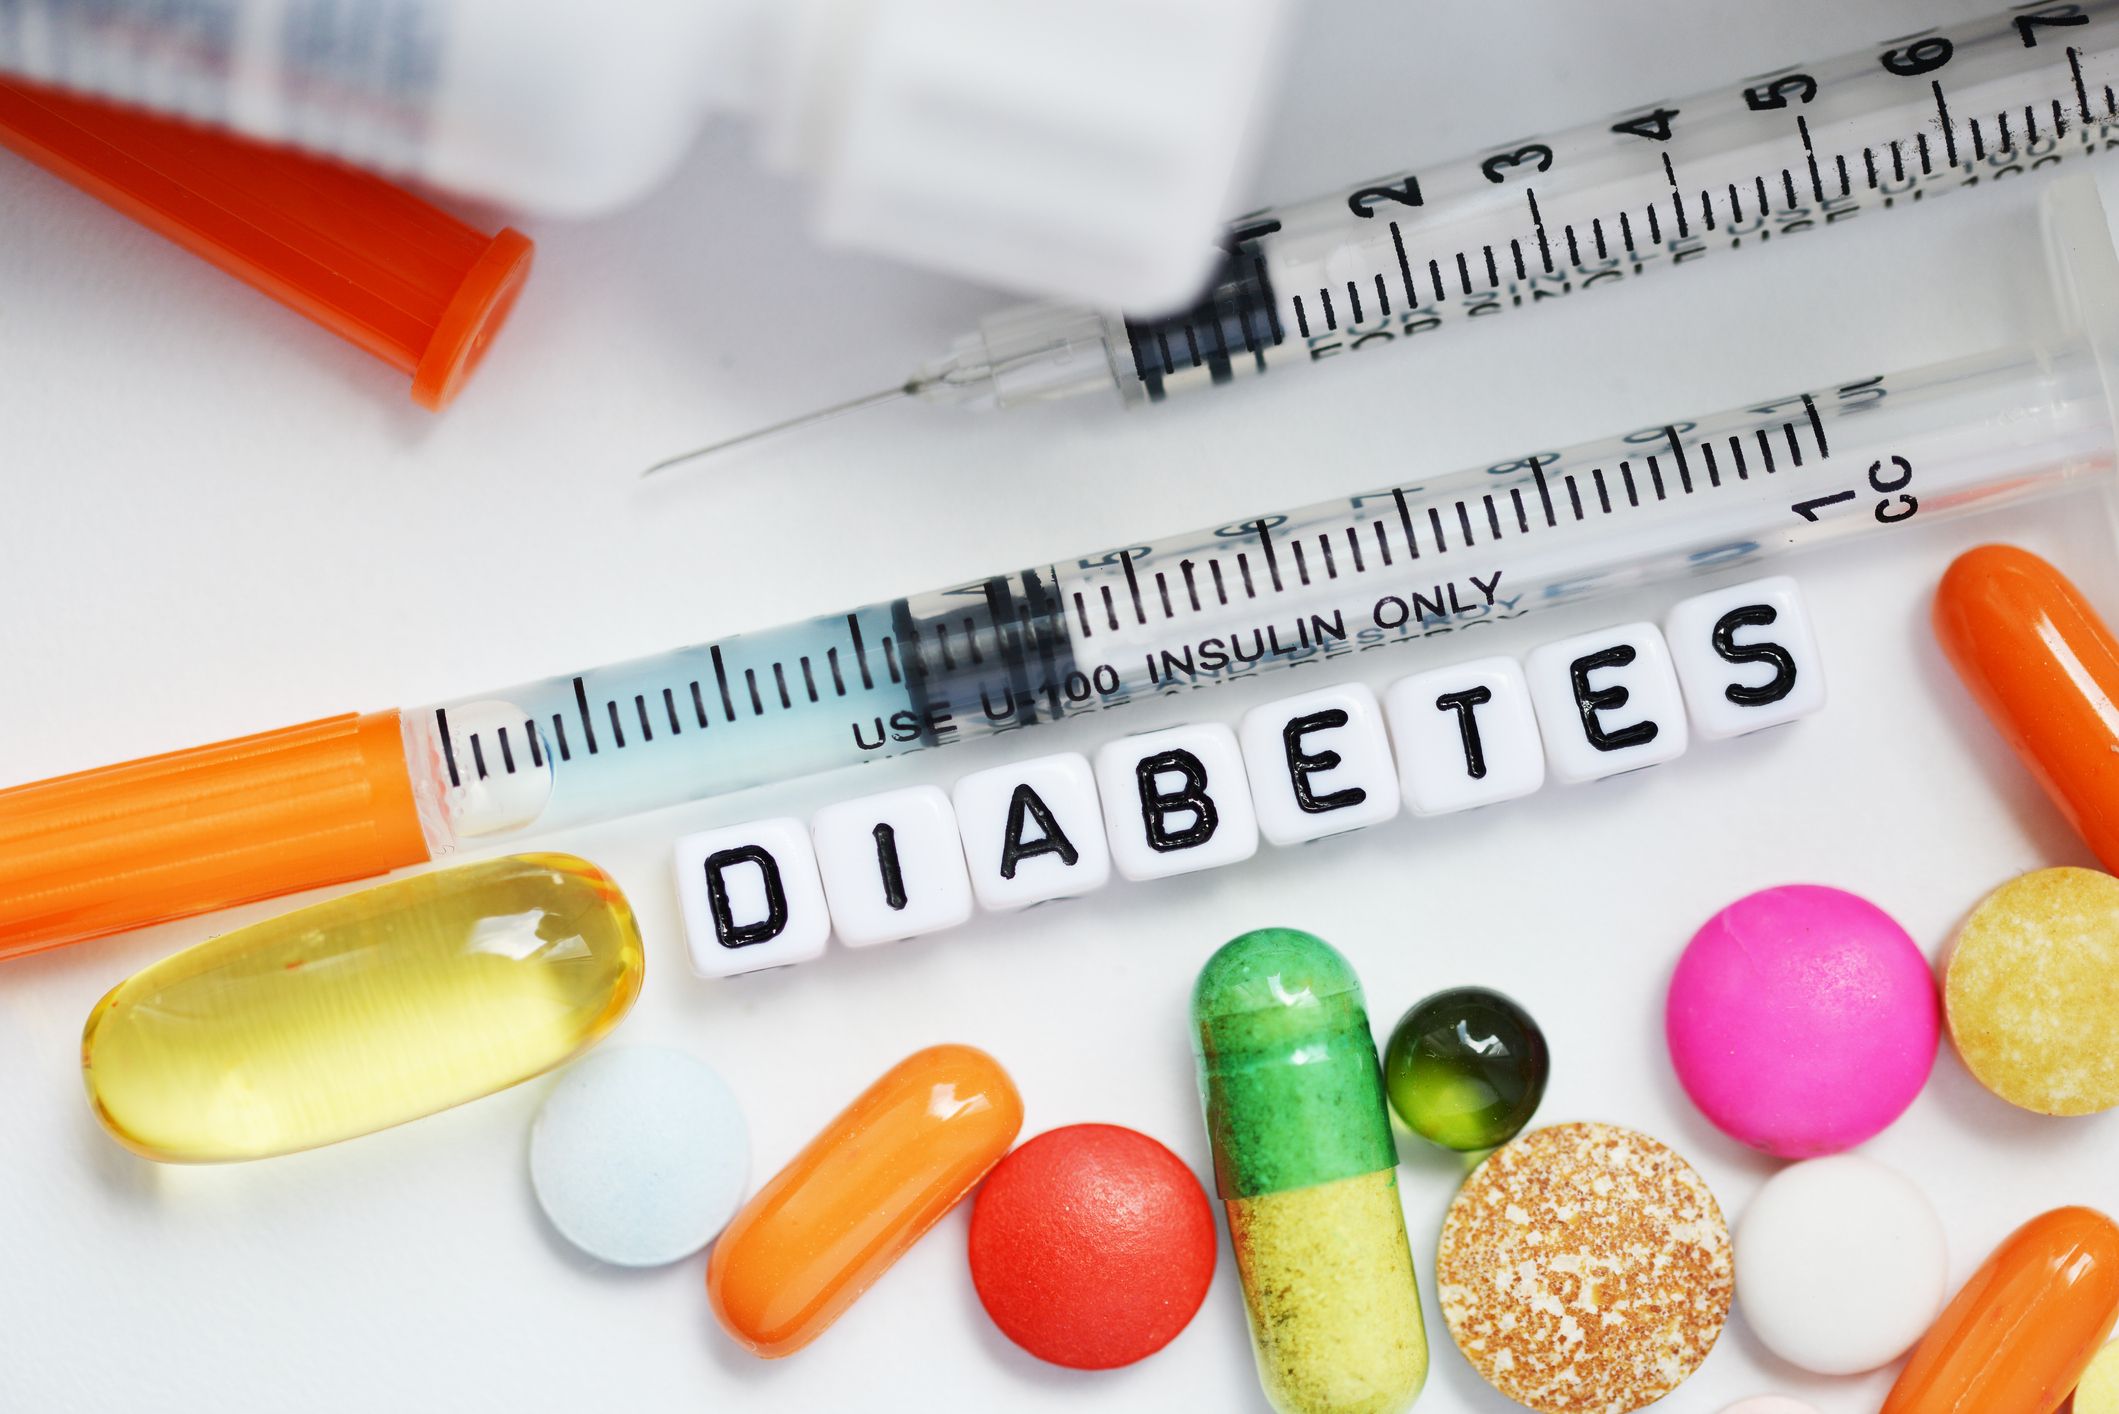 10 signs that diabetes is killing you